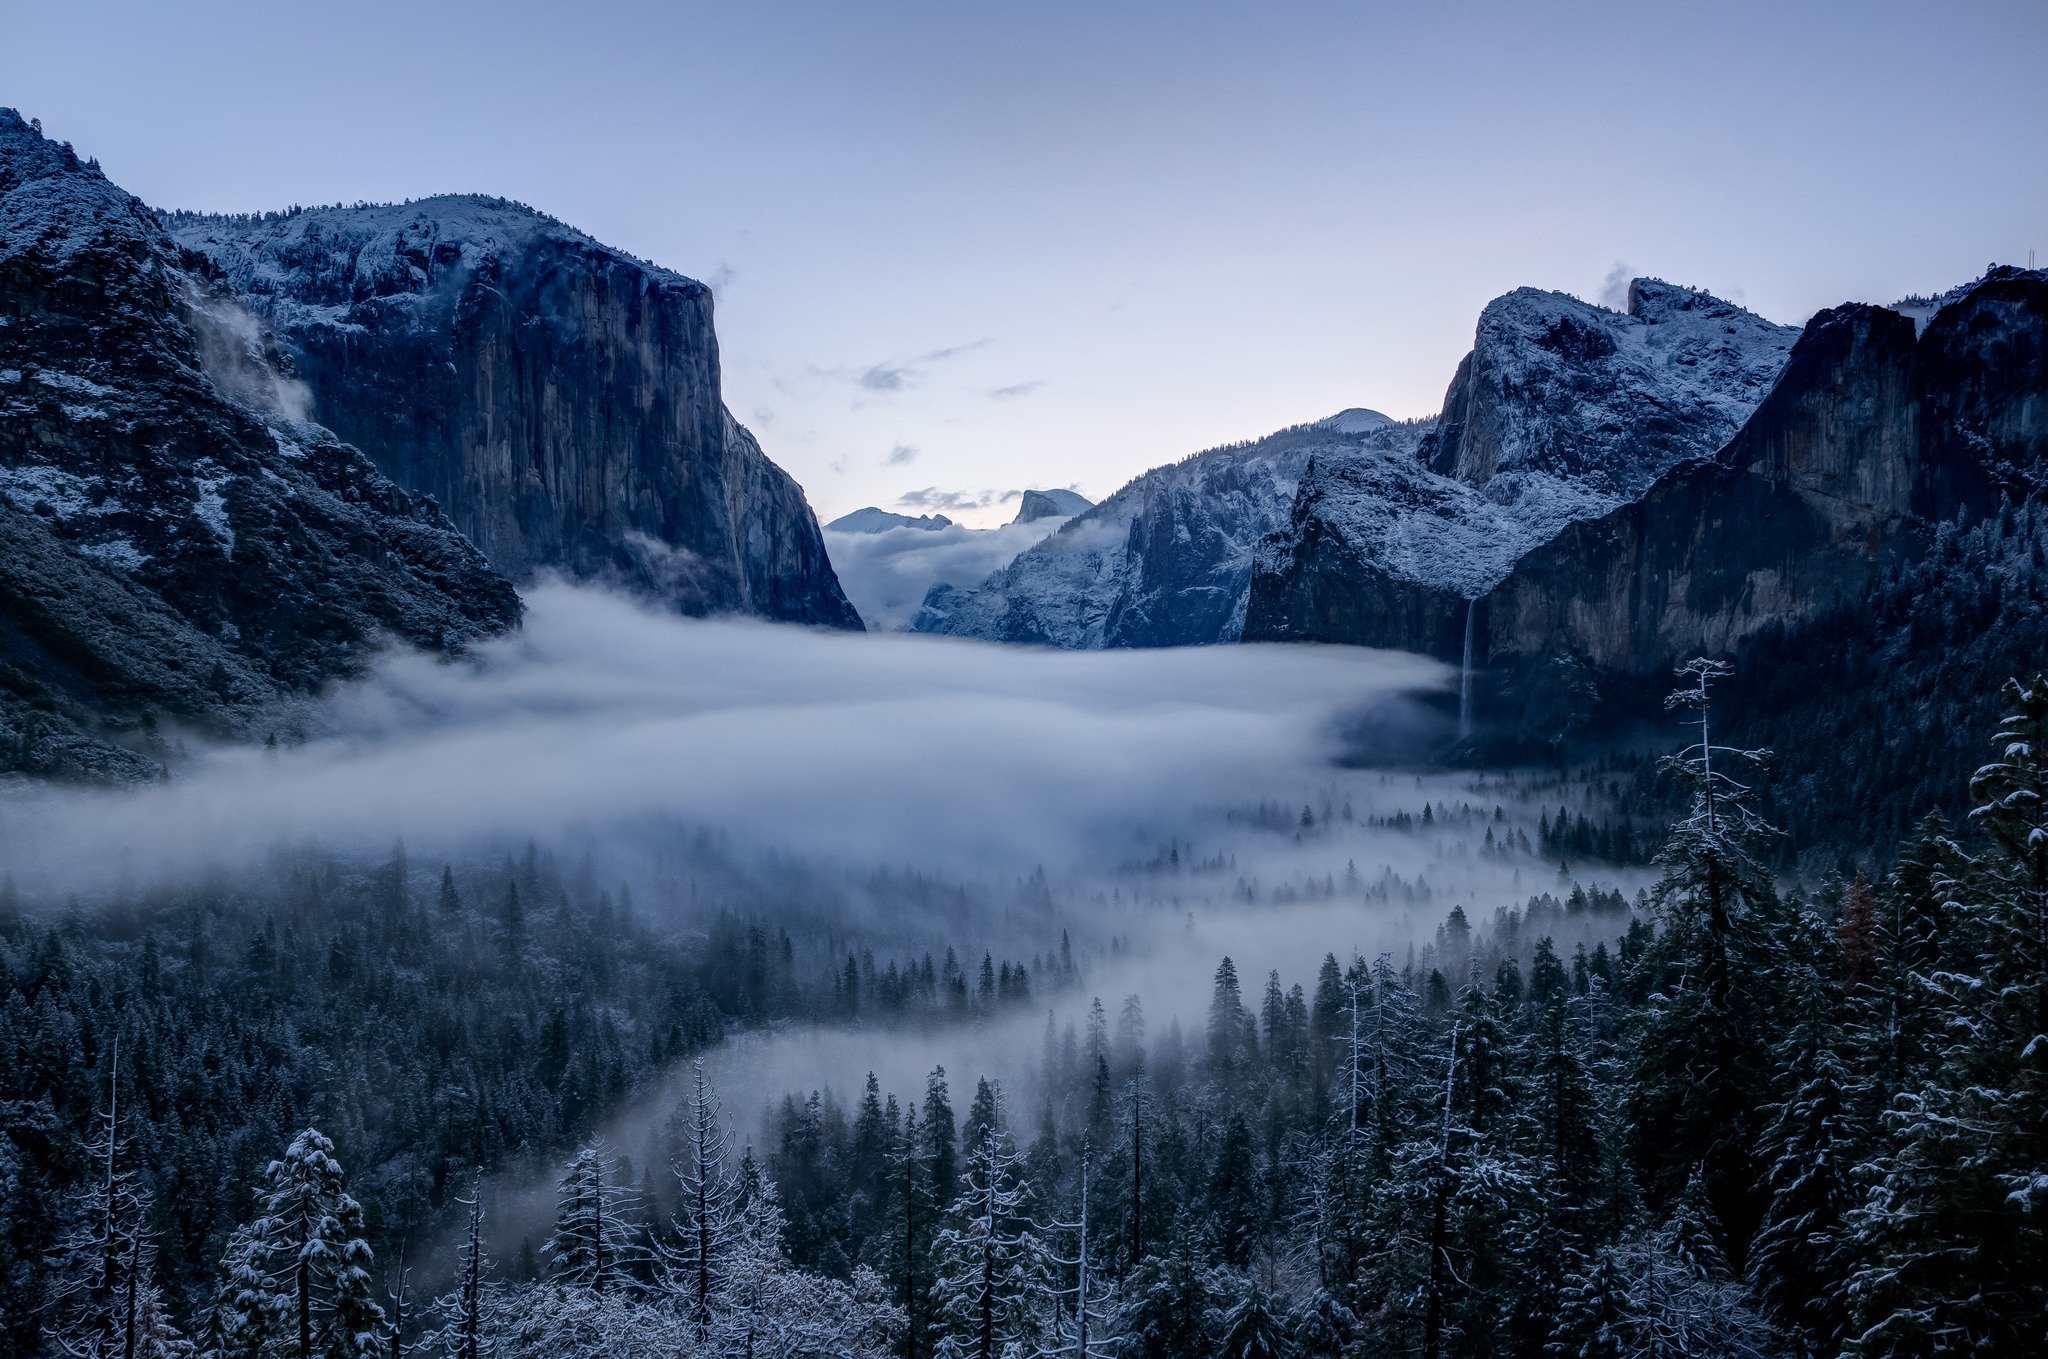 Yosemite valley with snow in winter - USA national park